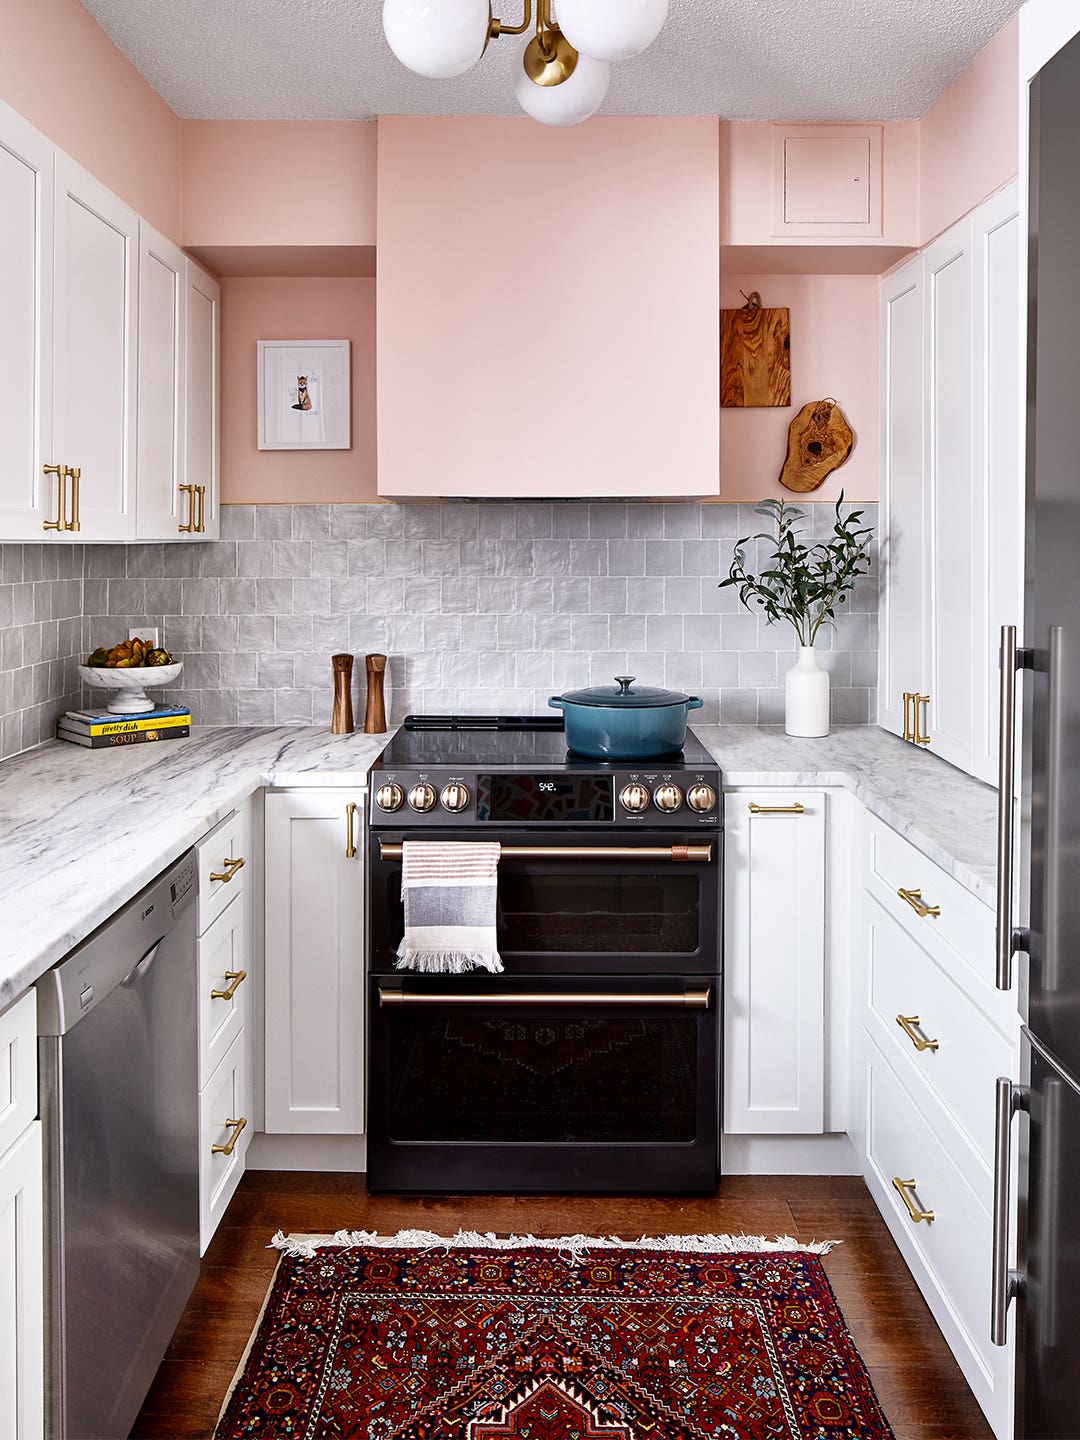 small pink kitchen with black oven